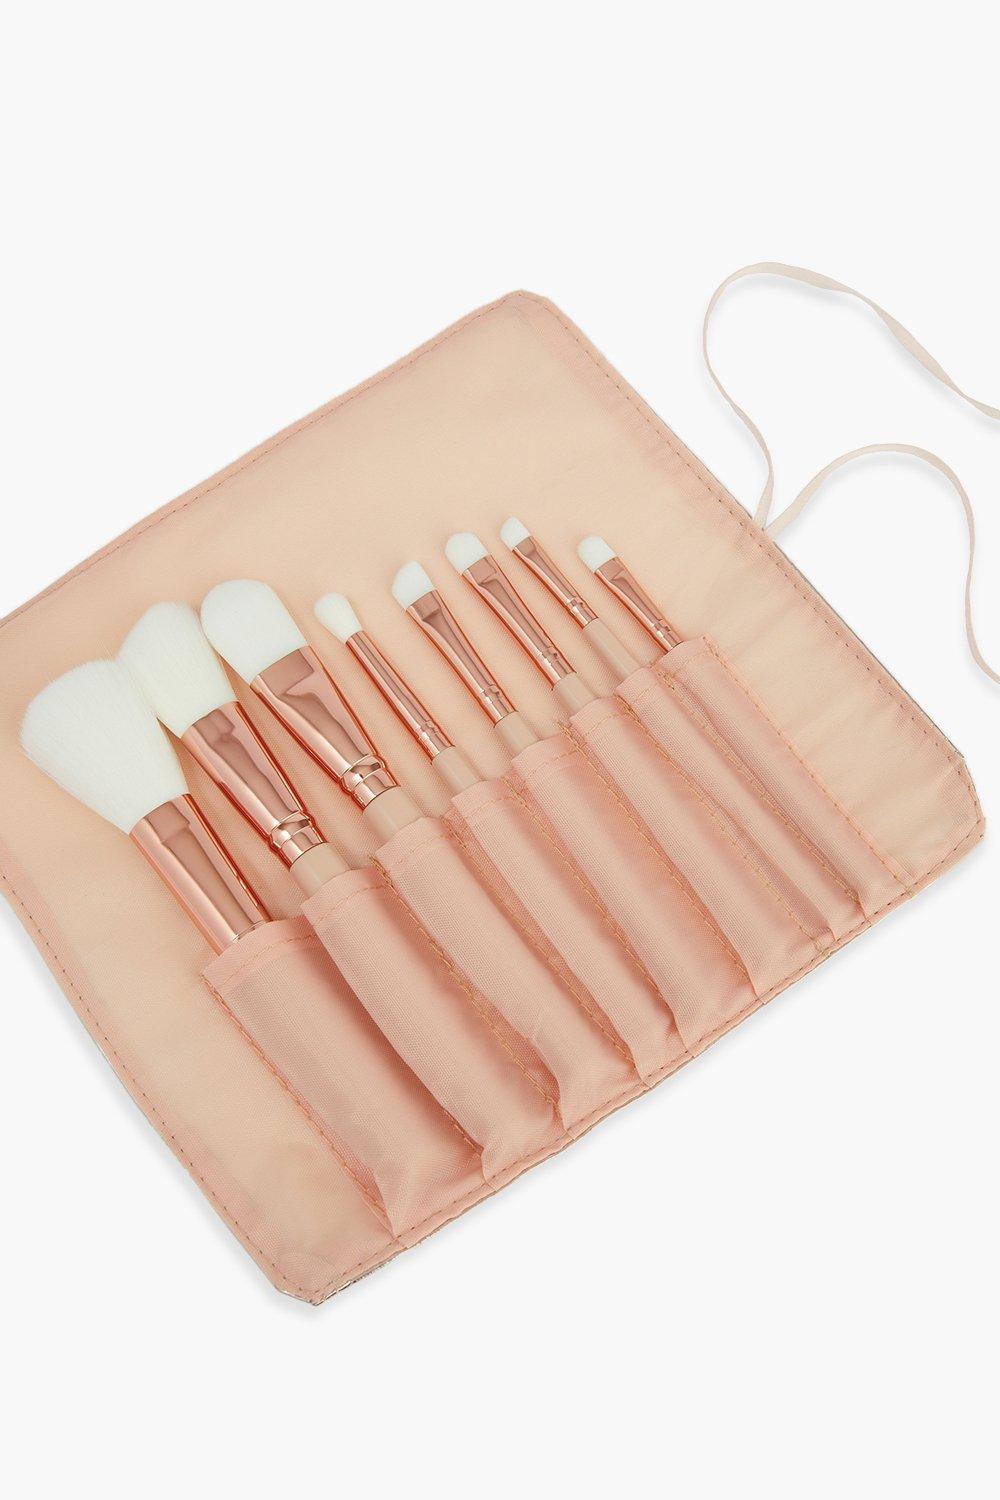 Academy Of Colour Brushes Set Met Wrap, Pink